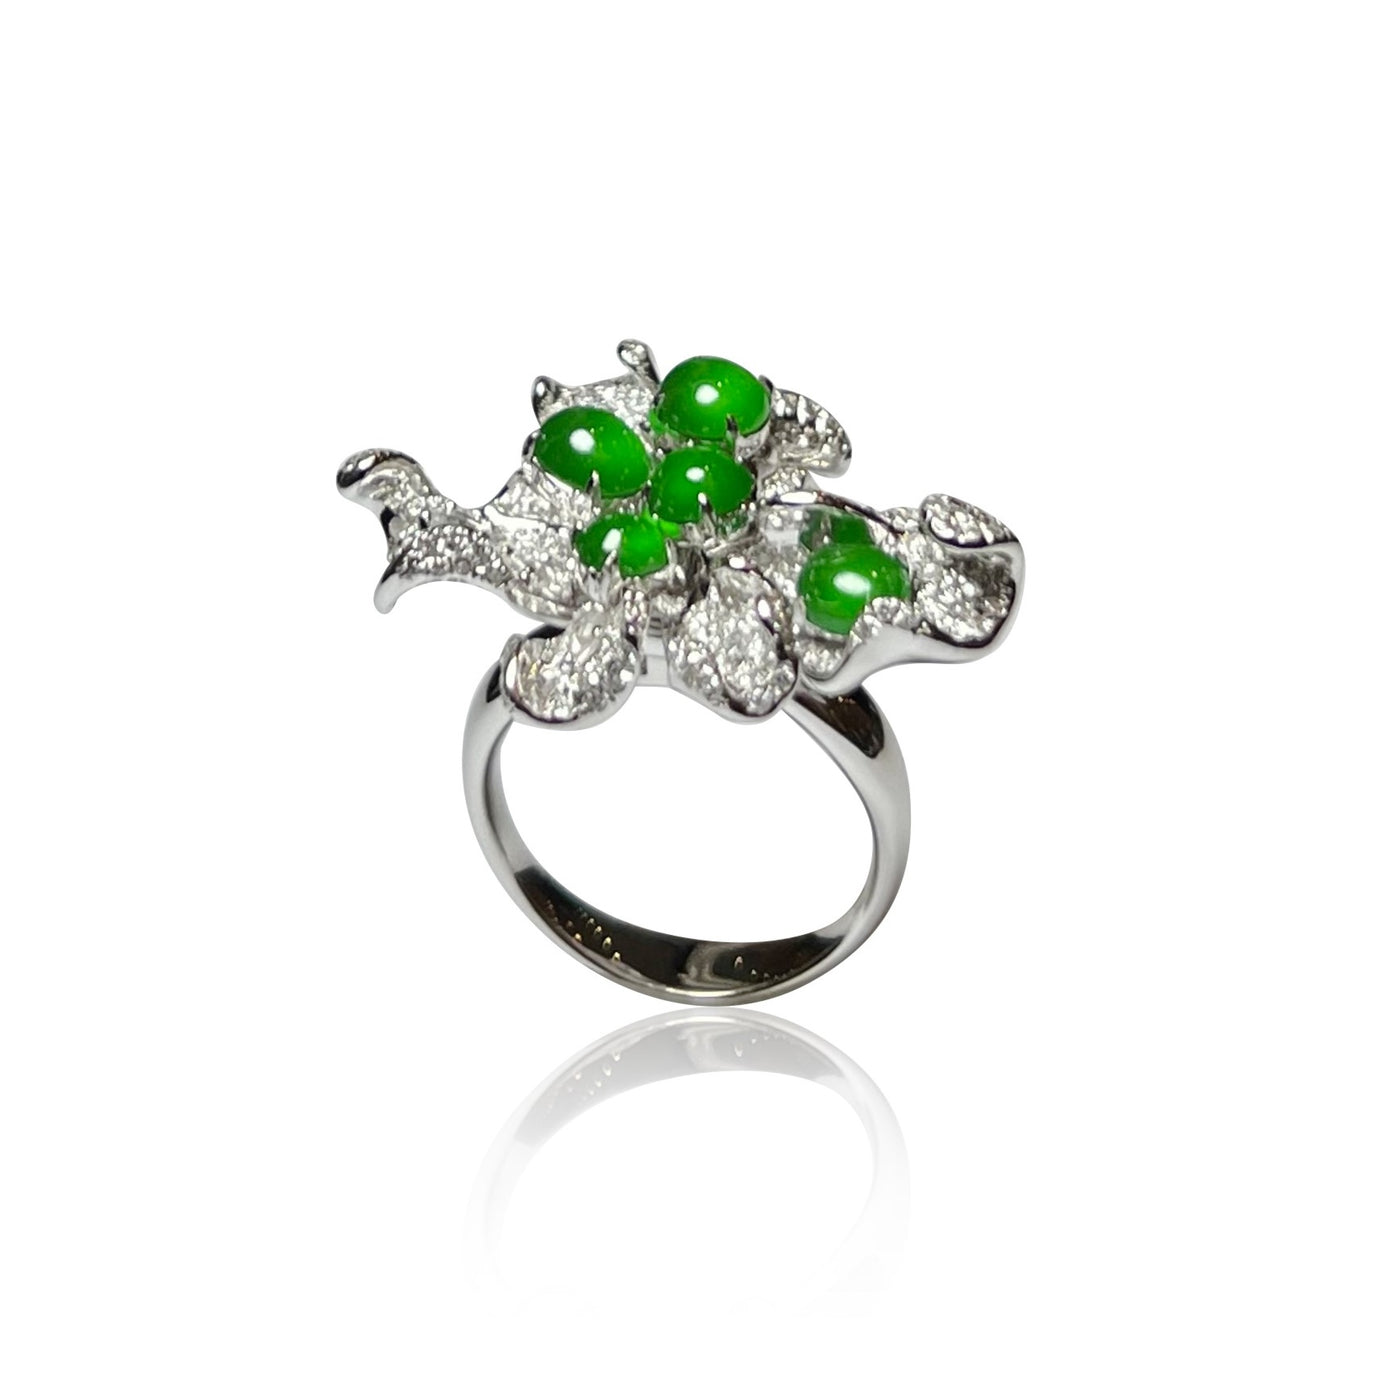 FIRE LILY JADEITE CABOCHON RING IN 18K WHITE GOLD AND DIAMOND